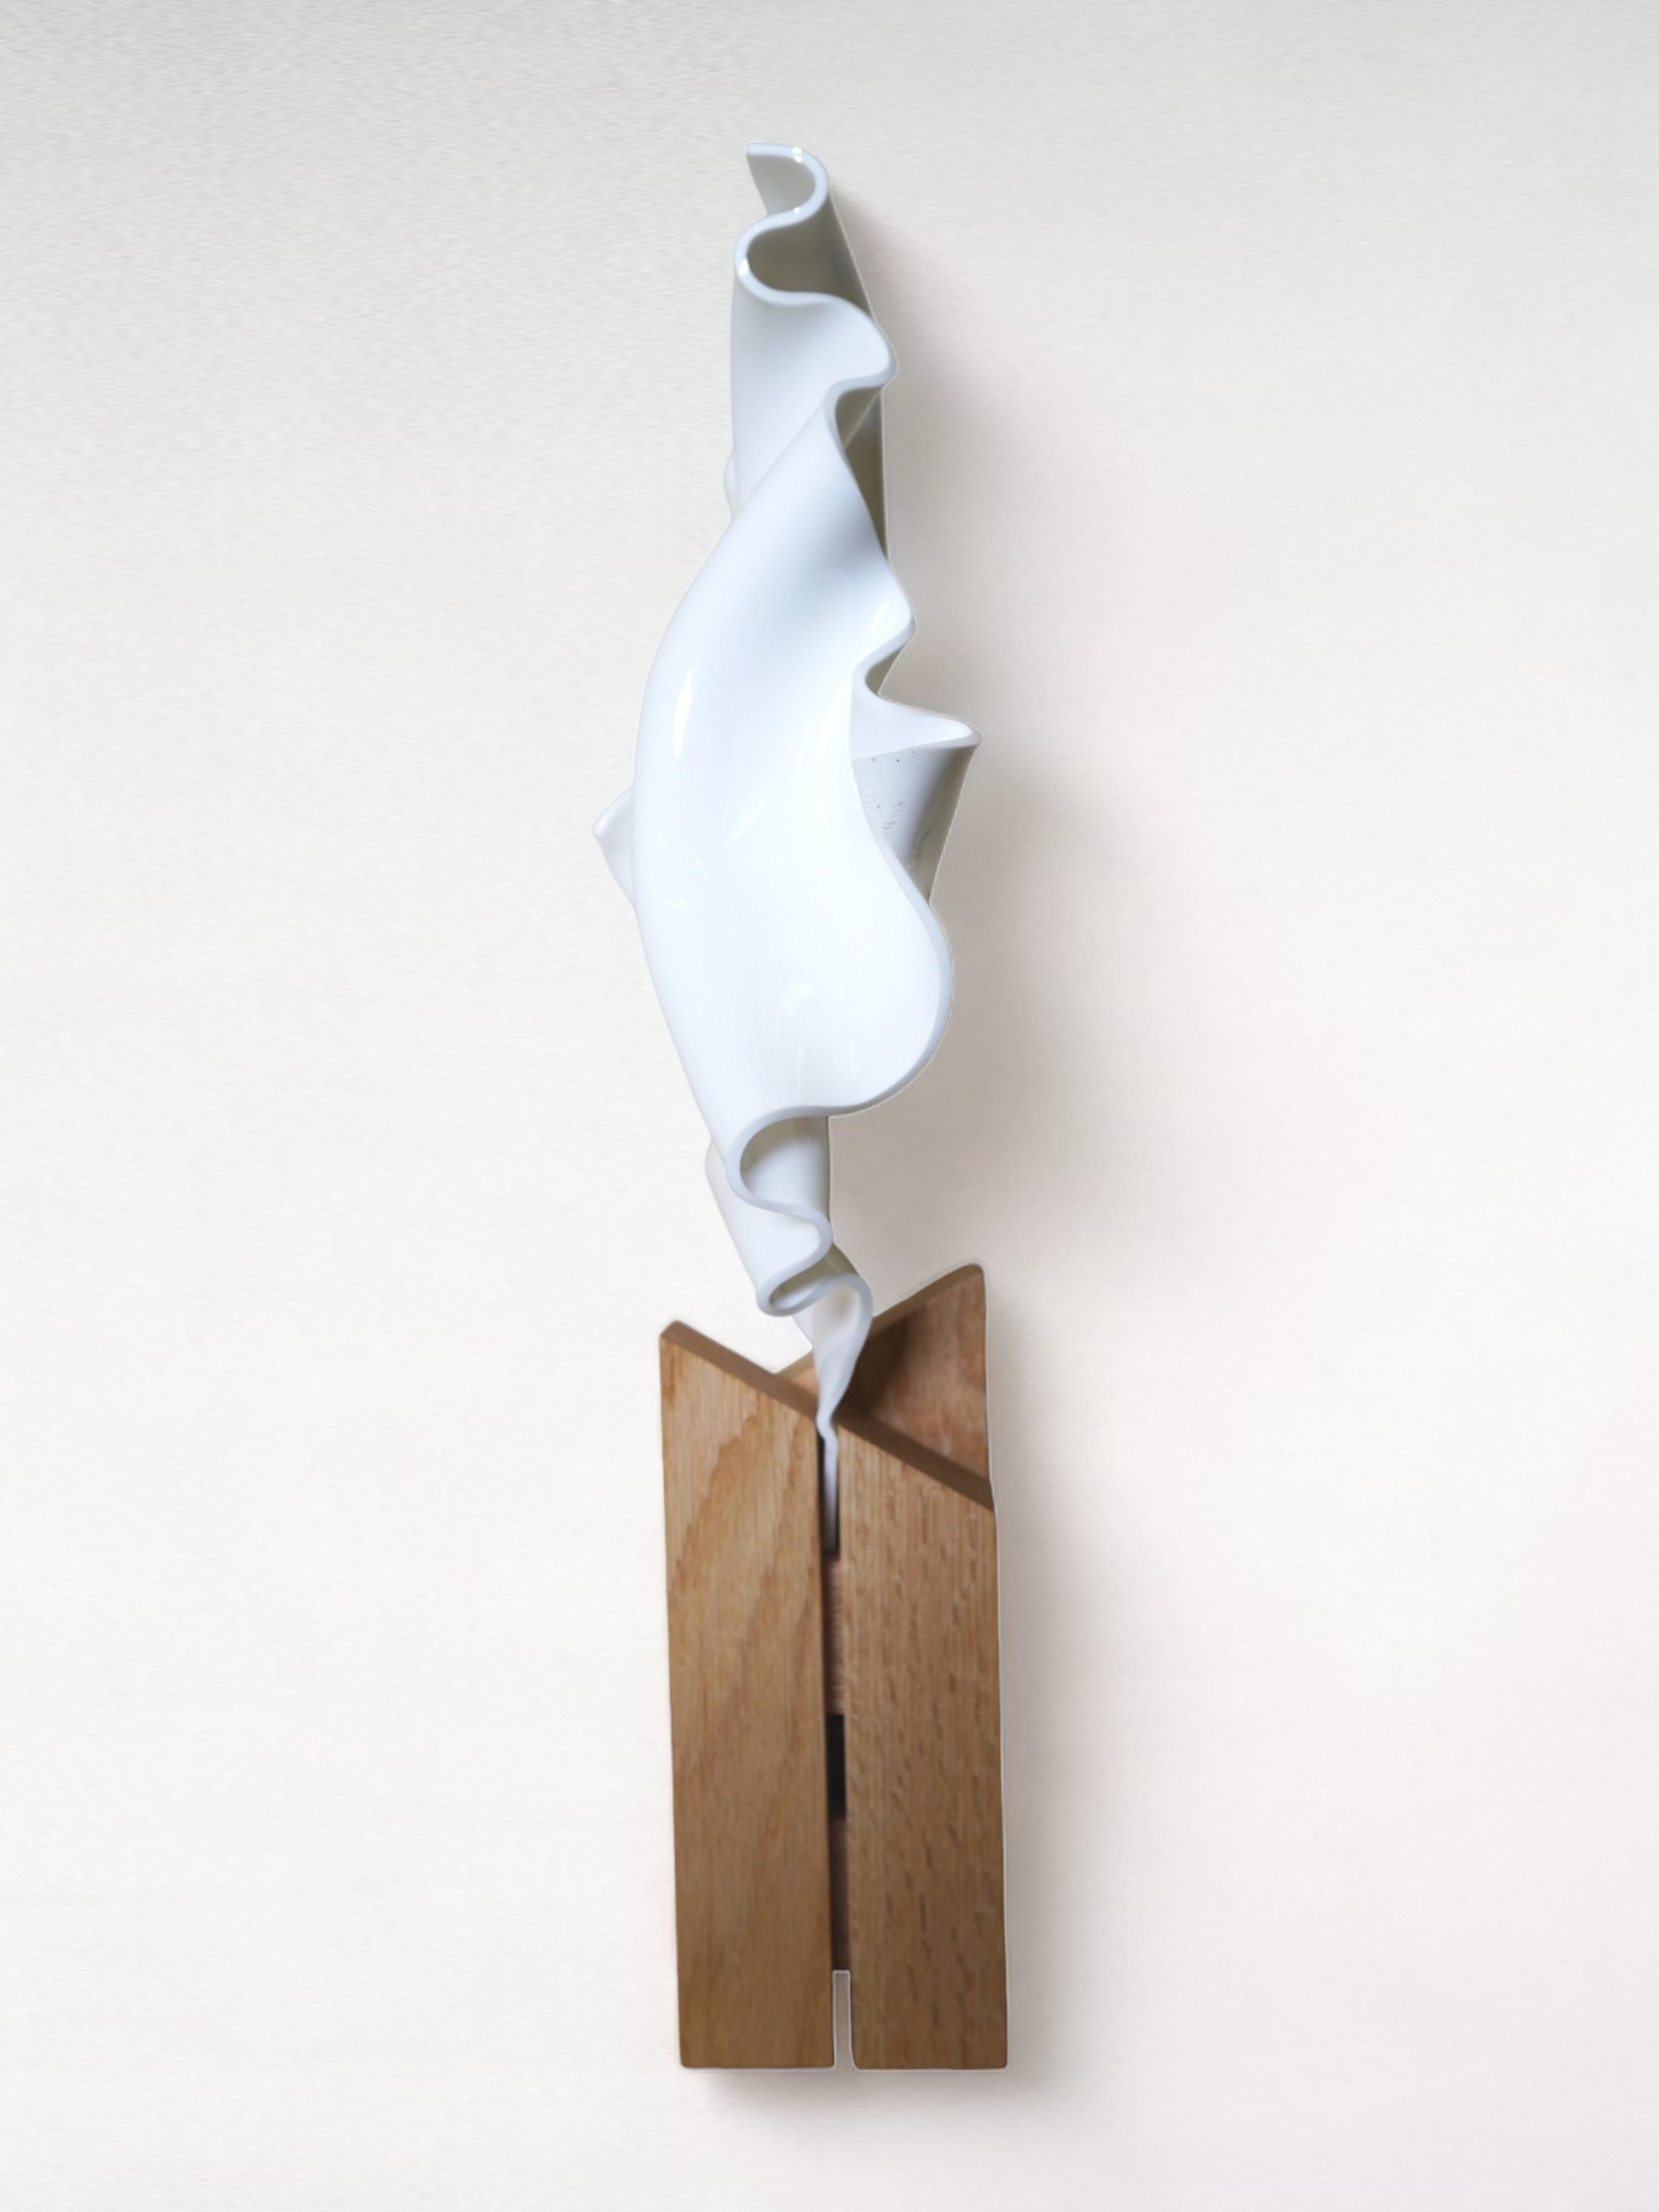 IVORY HARMONY, Pedestal Sculpture hand-formed acrylic and oak pedestal - Abstract Painting by Cari Cohen